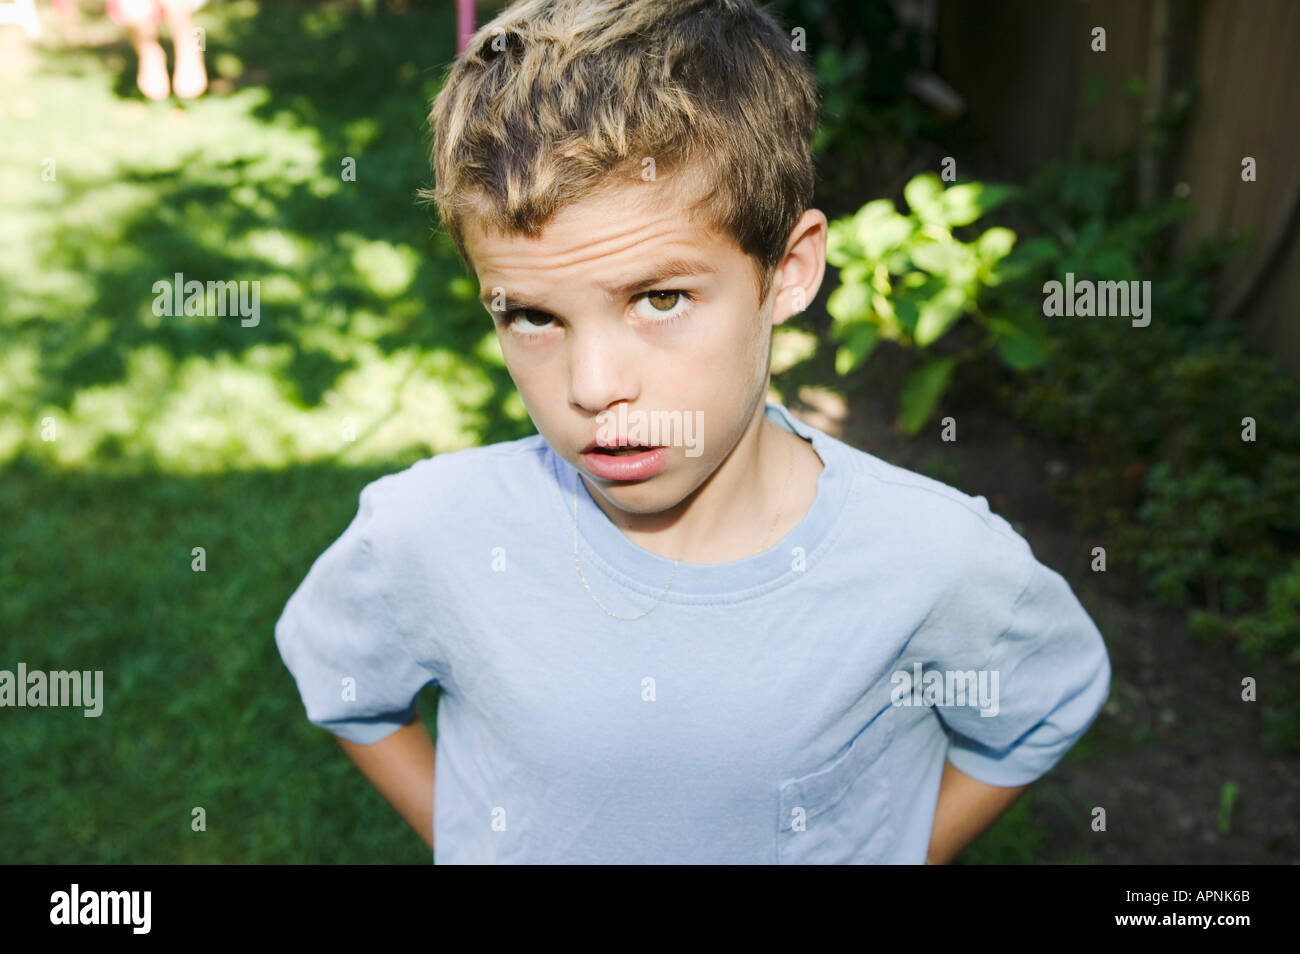 Boy with a quizzical expression Stock Photo